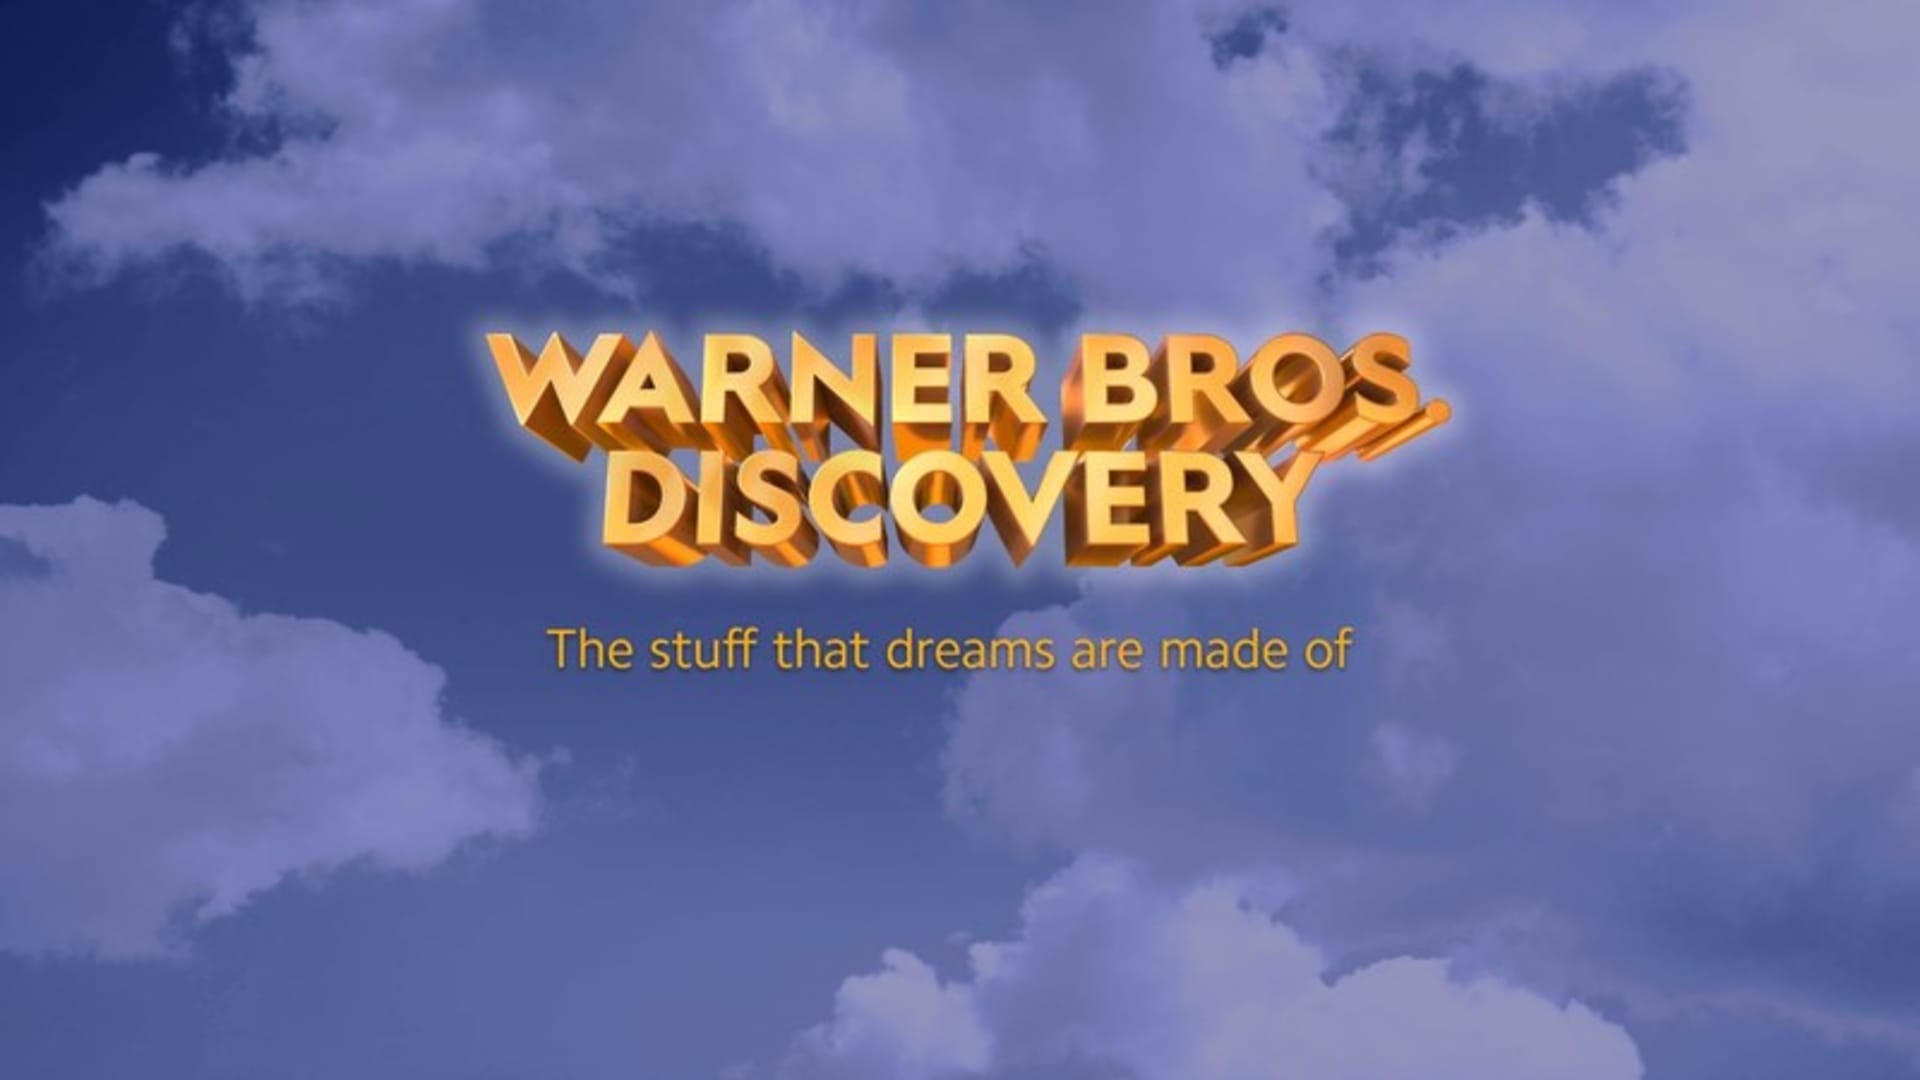 Buy the Warner Bros. Discovery dip as shares can nearly double from here, Benchmark says